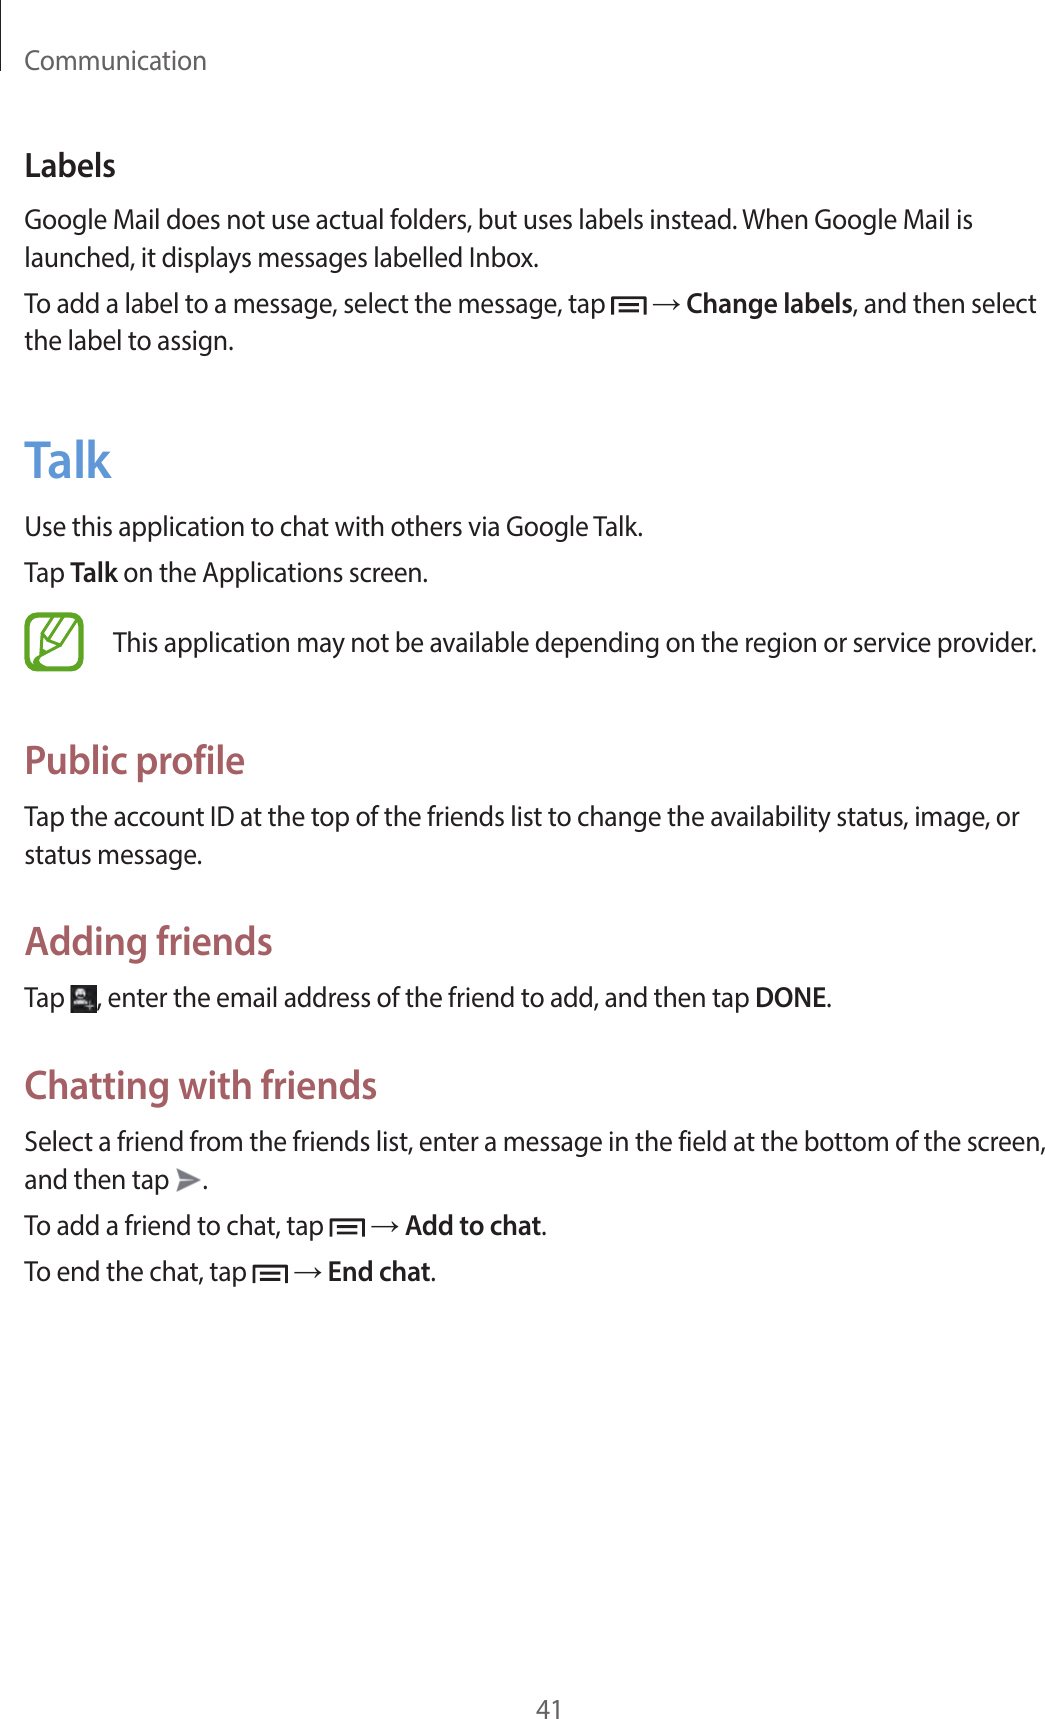 Communication41LabelsGoogle Mail does not use actual folders, but uses labels instead. When Google Mail is launched, it displays messages labelled Inbox.To add a label to a message, select the message, tap   → Change labels, and then select the label to assign.TalkUse this application to chat with others via Google Talk.Tap Talk on the Applications screen.This application may not be available depending on the region or service provider.Public profileTap the account ID at the top of the friends list to change the availability status, image, or status message.Adding friendsTap  , enter the email address of the friend to add, and then tap DONE.Chatting with friendsSelect a friend from the friends list, enter a message in the field at the bottom of the screen, and then tap  .To add a friend to chat, tap   → Add to chat.To end the chat, tap   → End chat.